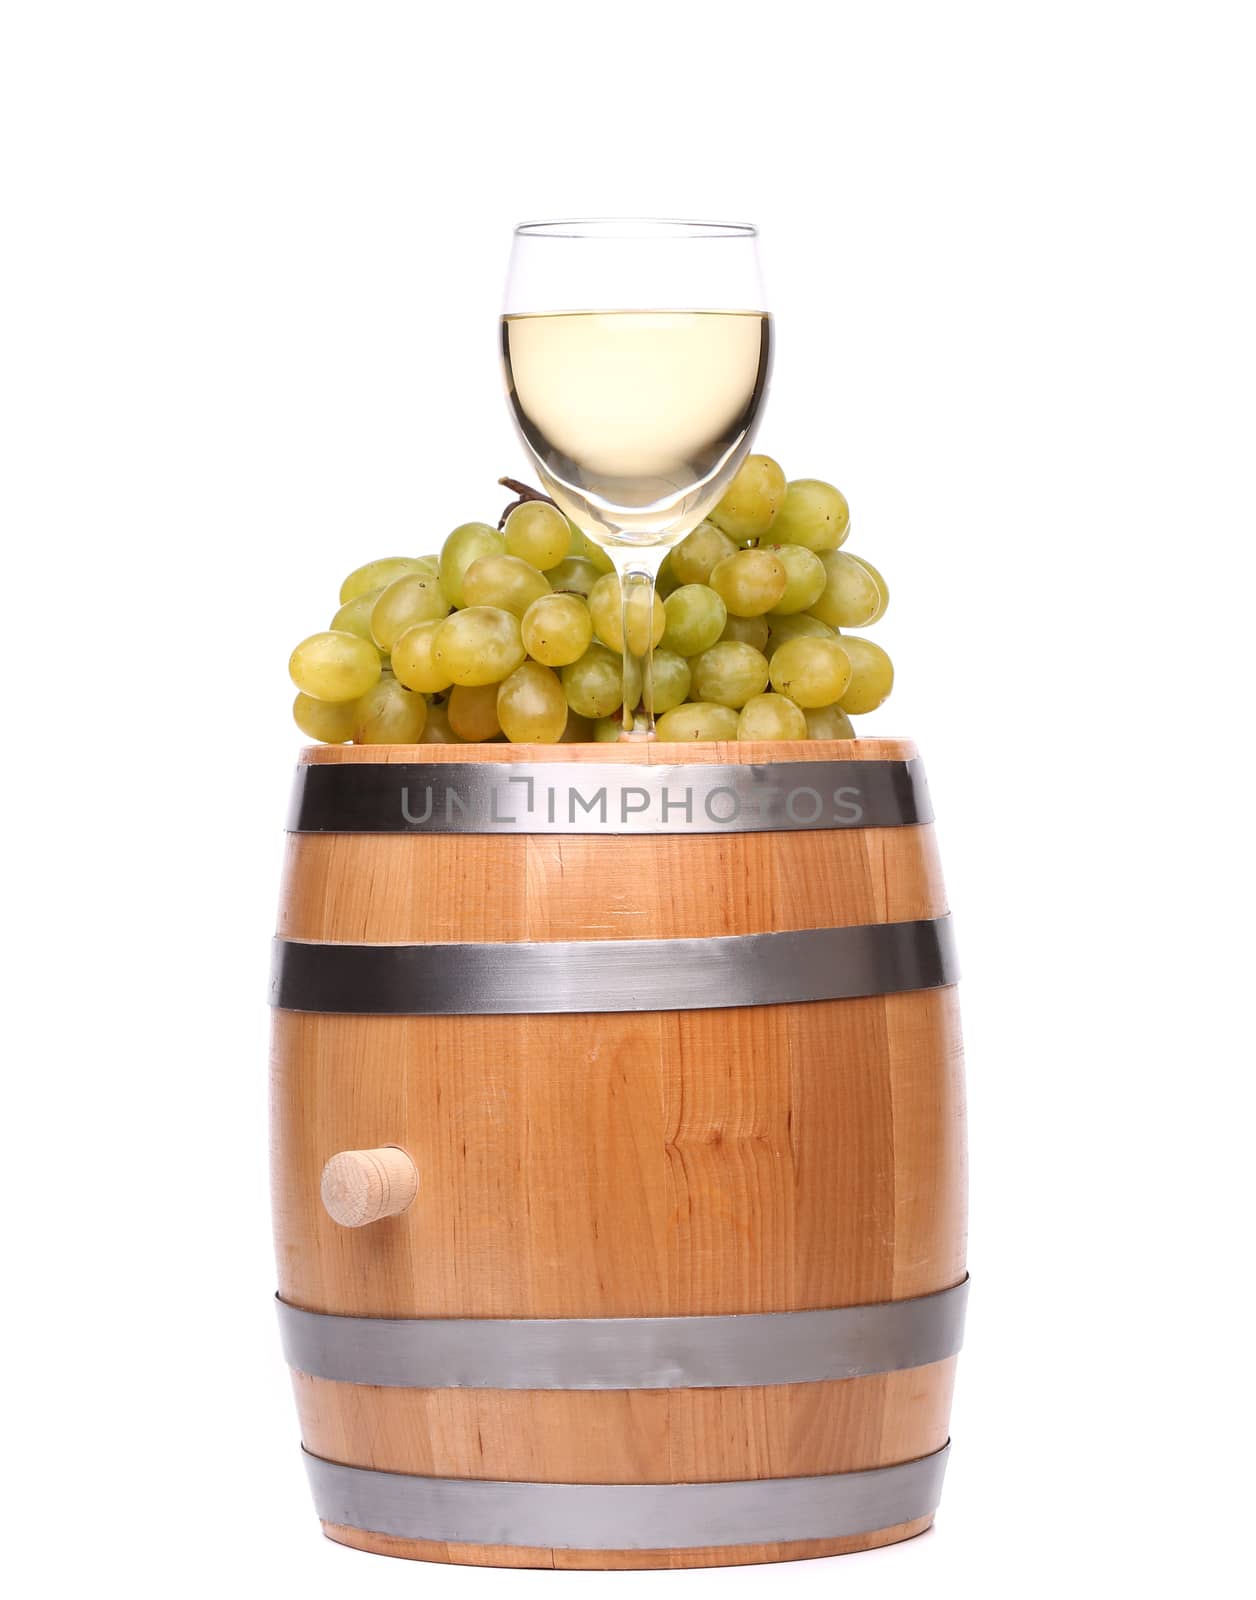 barrel, ripe grapes and glass of wine